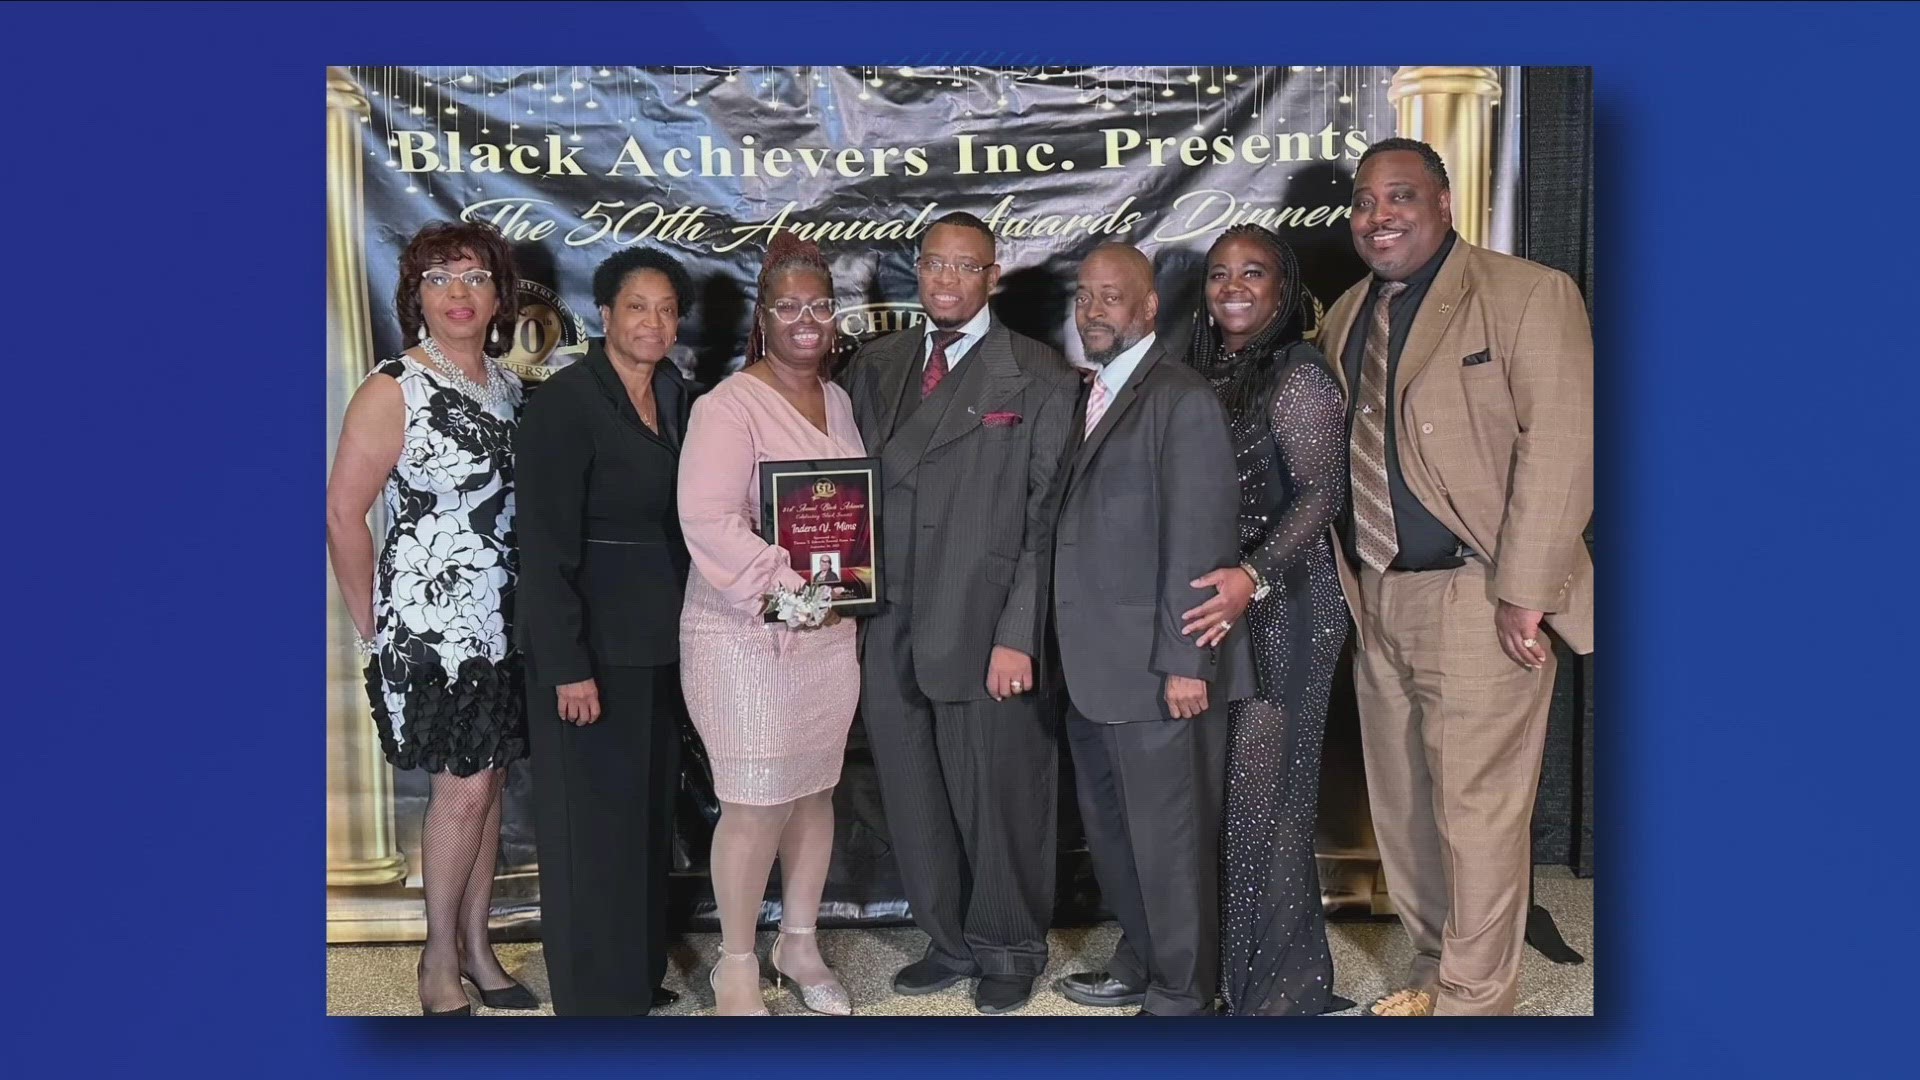 ​More than 1,000 people were in attendance celebrating the achievements of African Americans in the Western New York community.